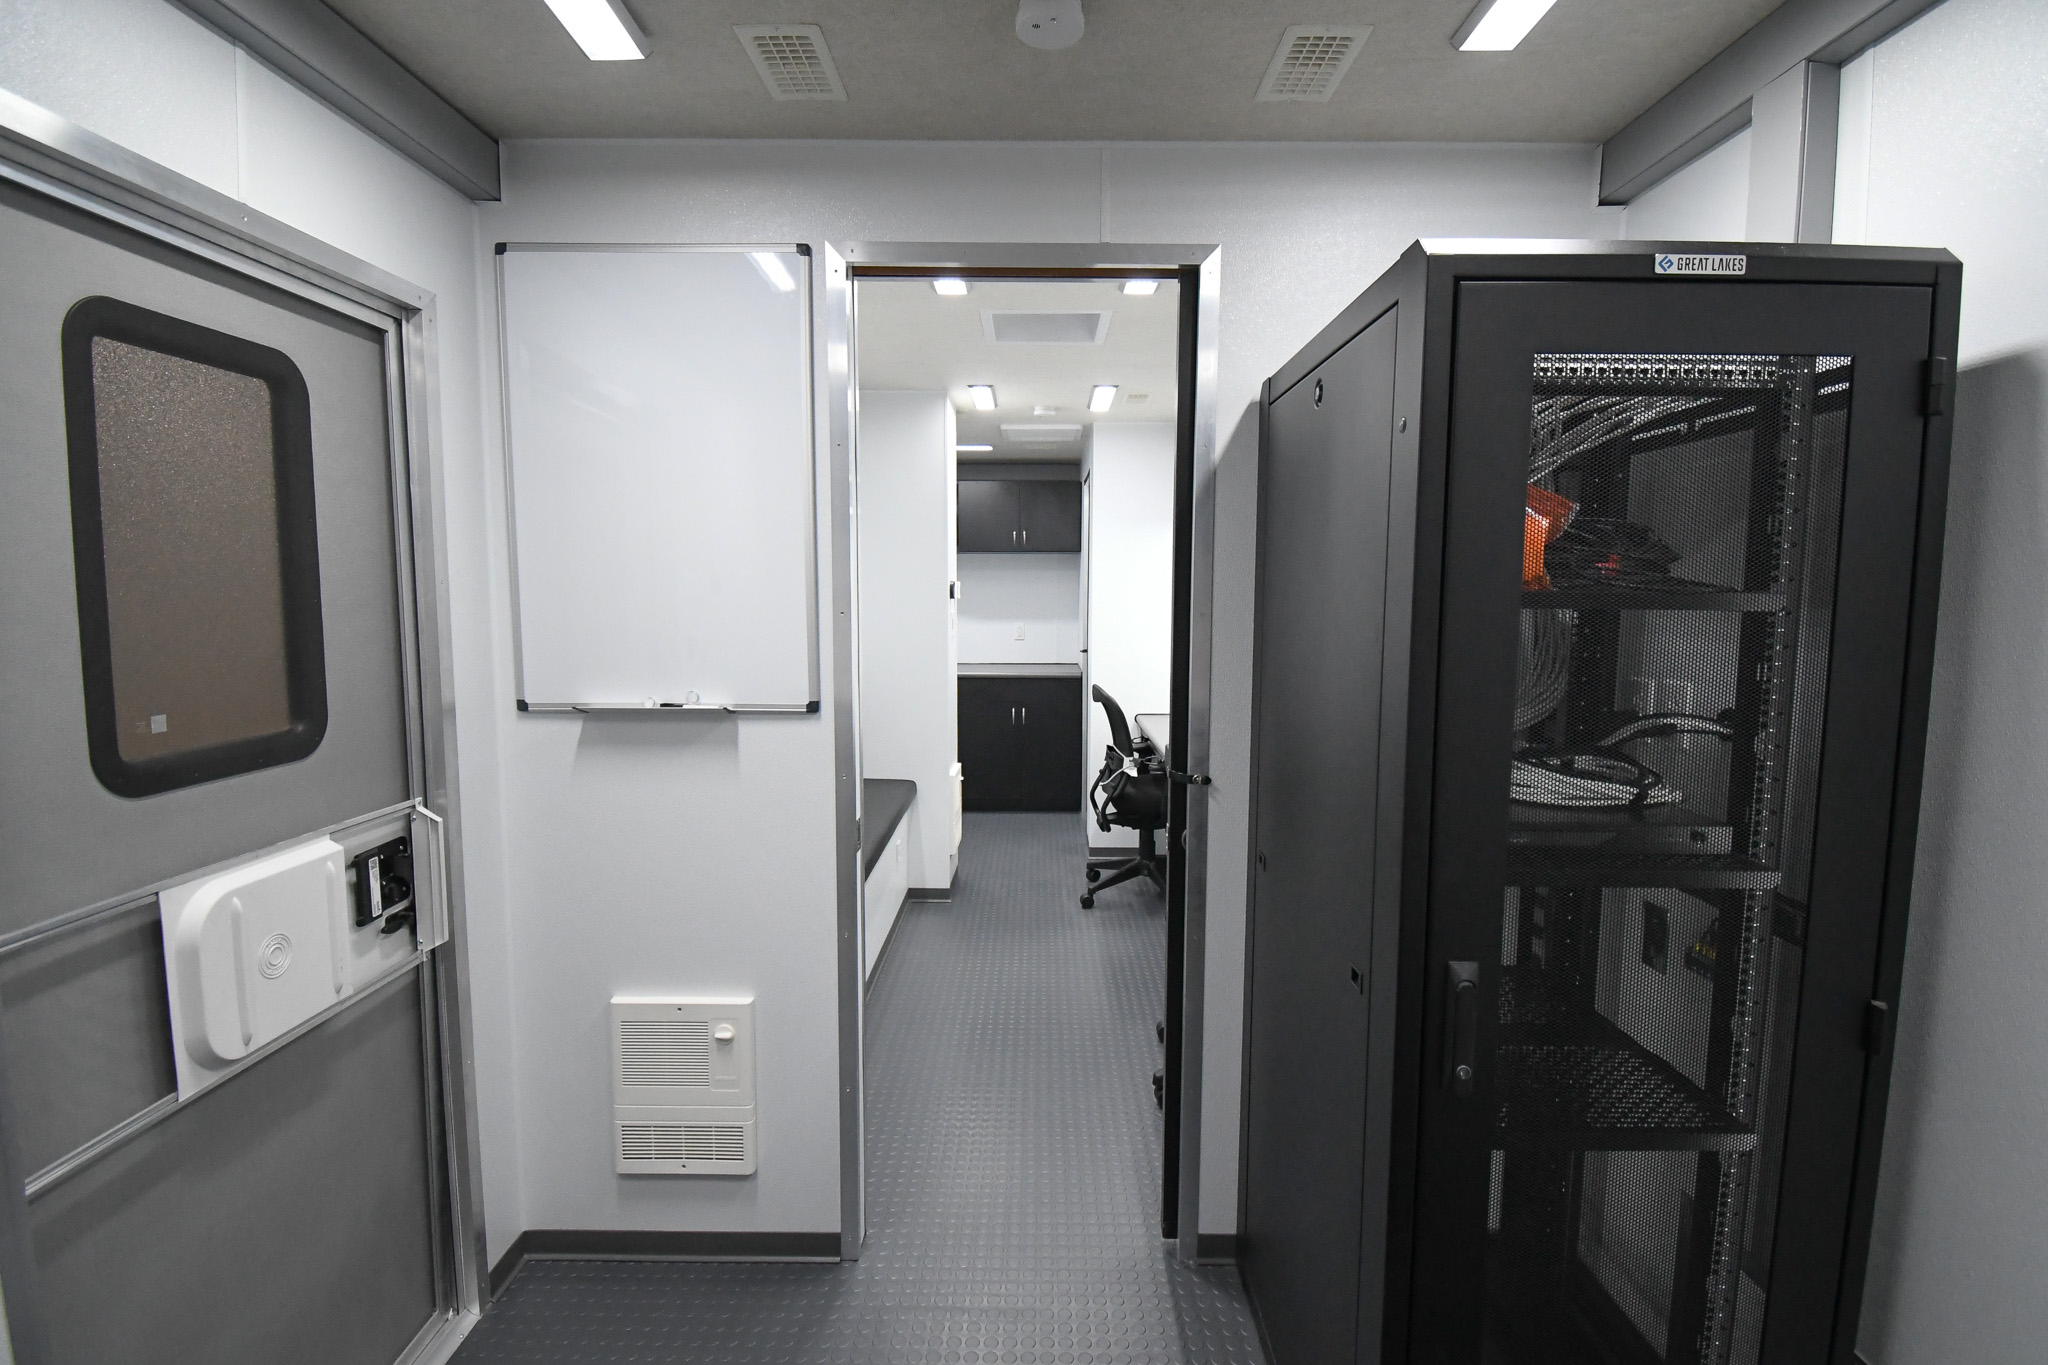 A front-to-back view inside the unit for Susquehanna County, PA.